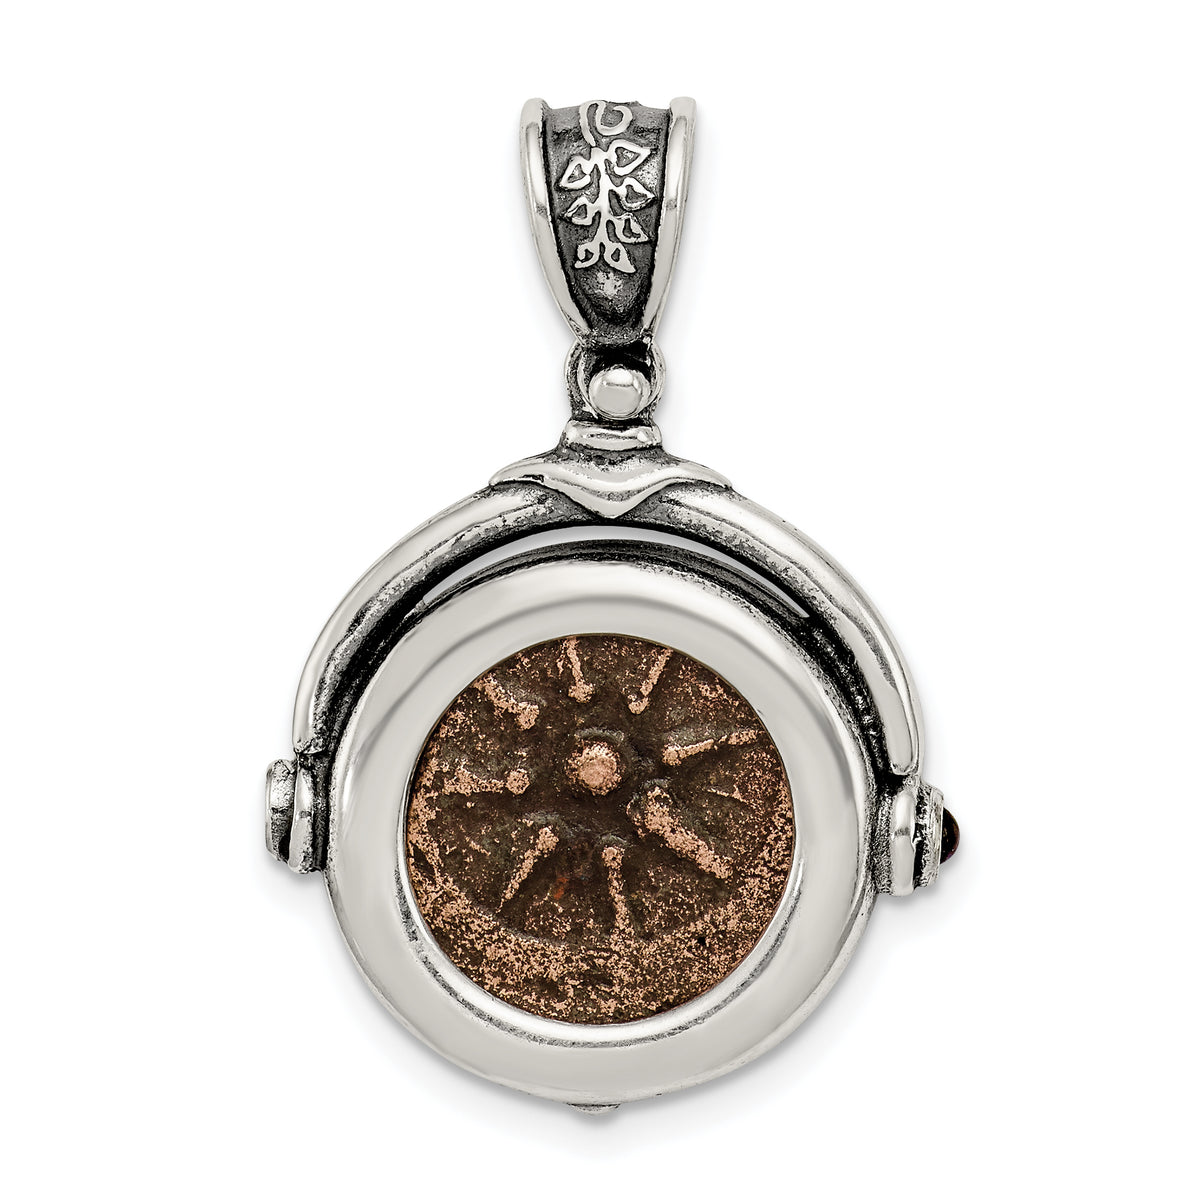 Ancient Coins Sterling Silver and Bronze Antiqued Widow's Mite Coin Reversible Pendant with a Certificate of Authenticity